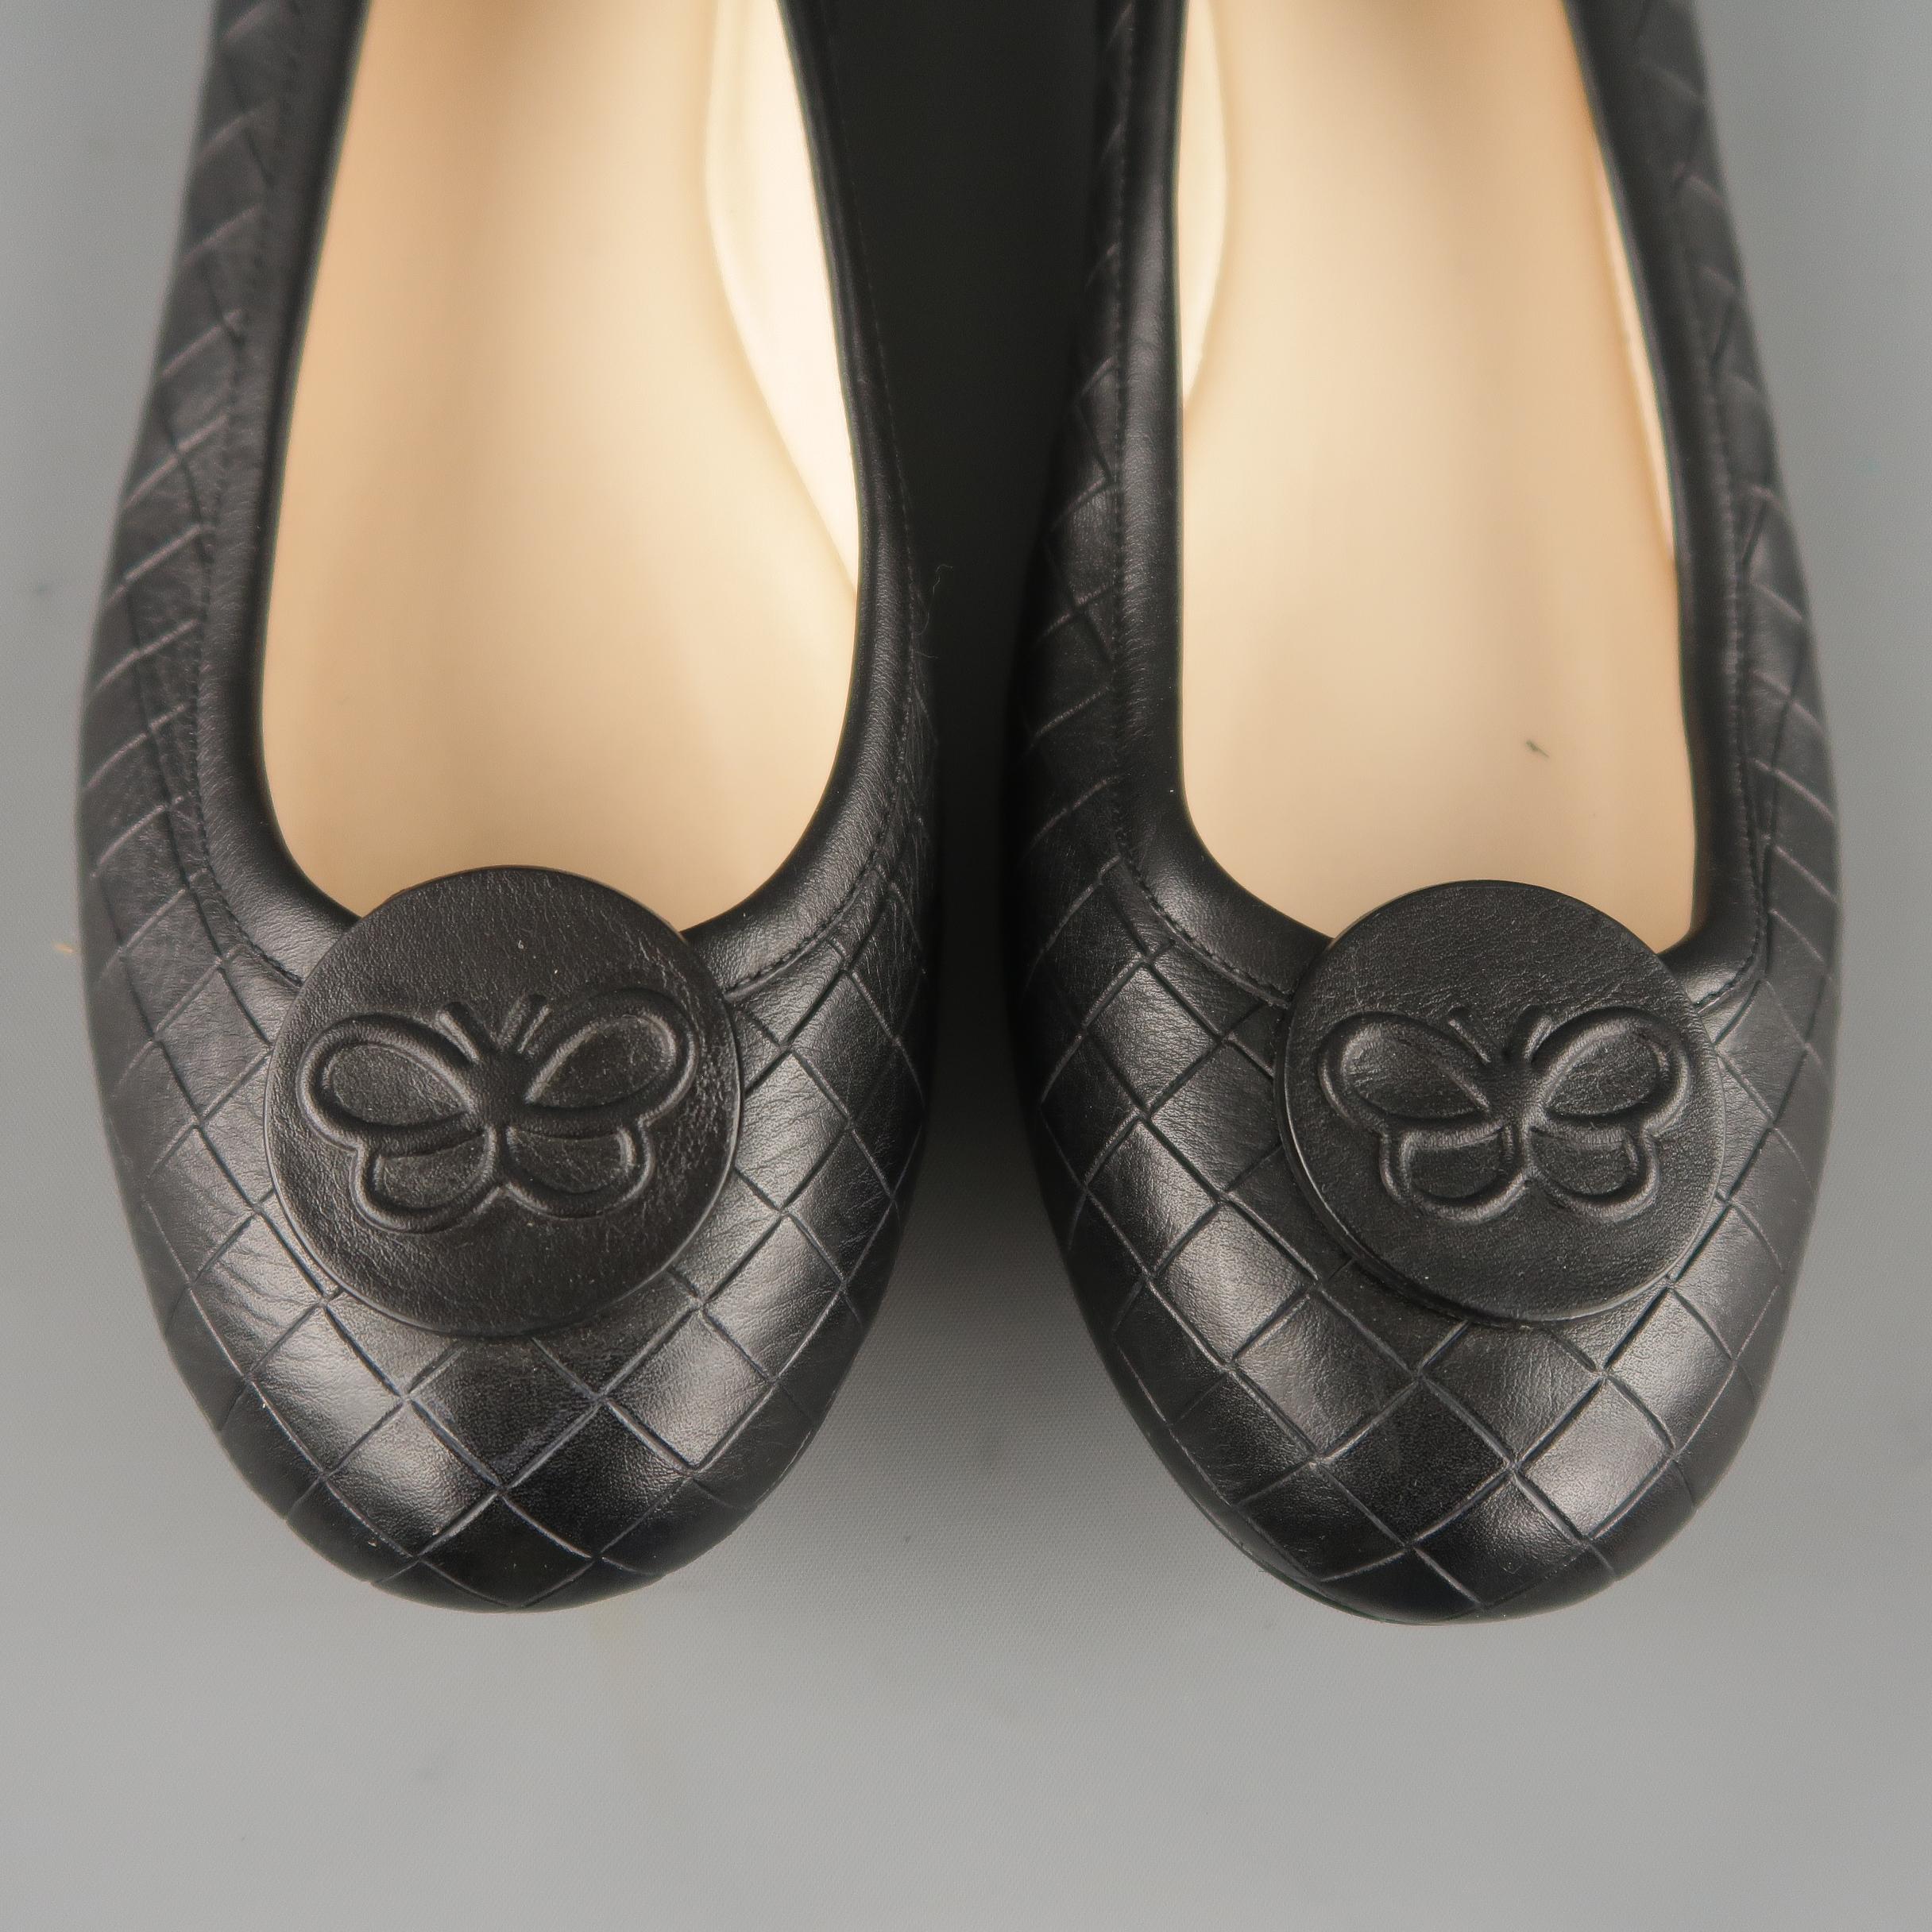 BOTTEGA VENETA ballet flats come in signature woven Intrecciato leather with a butterfly embossed embellishment. Made in Italy.
 
Excellent Pre-Owned Condition.
Marked: IT 41.5
 
Outsole: 11 x 3.5 in.